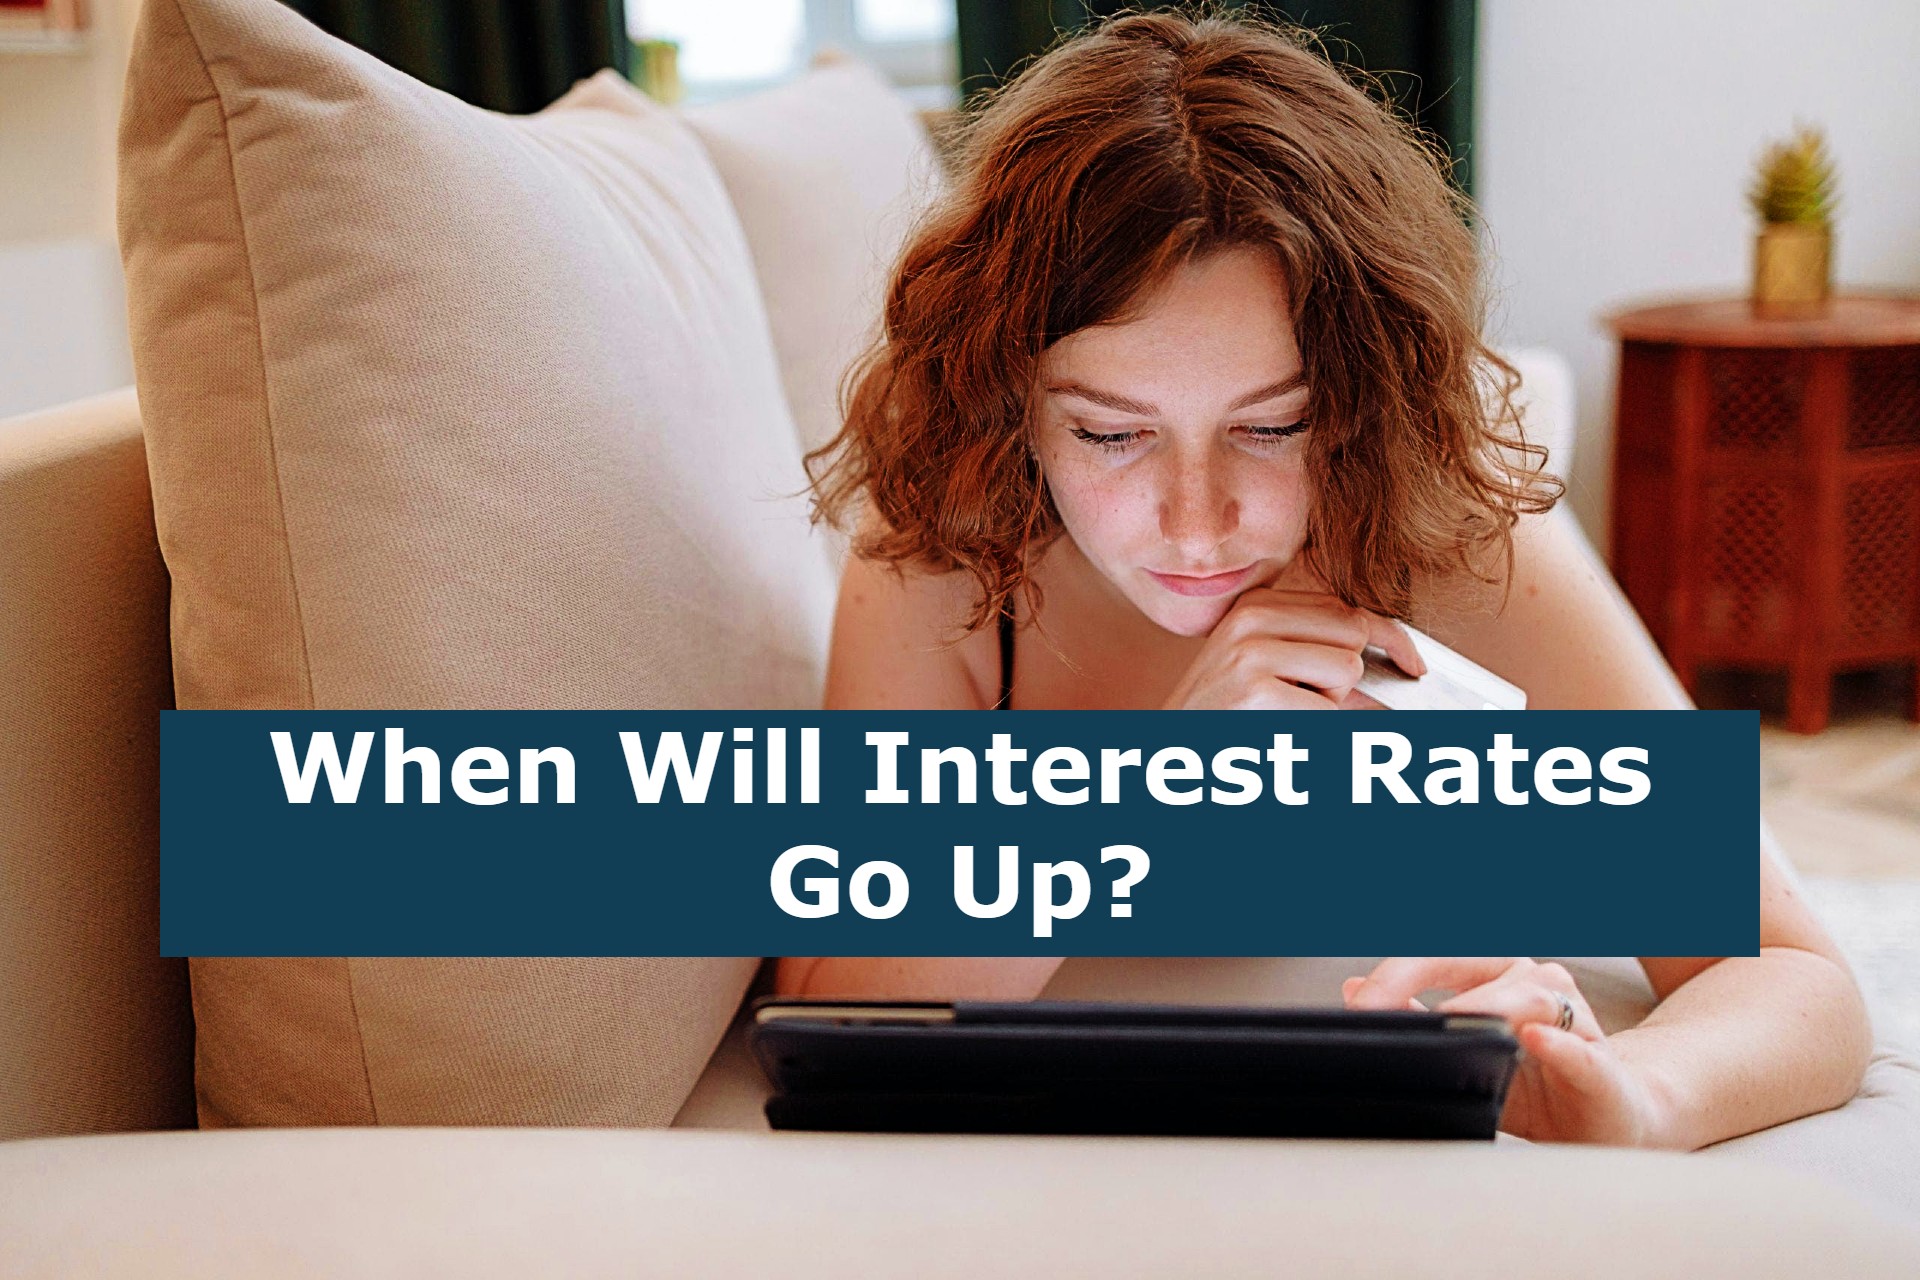 When Will Interest Rates Go Up?